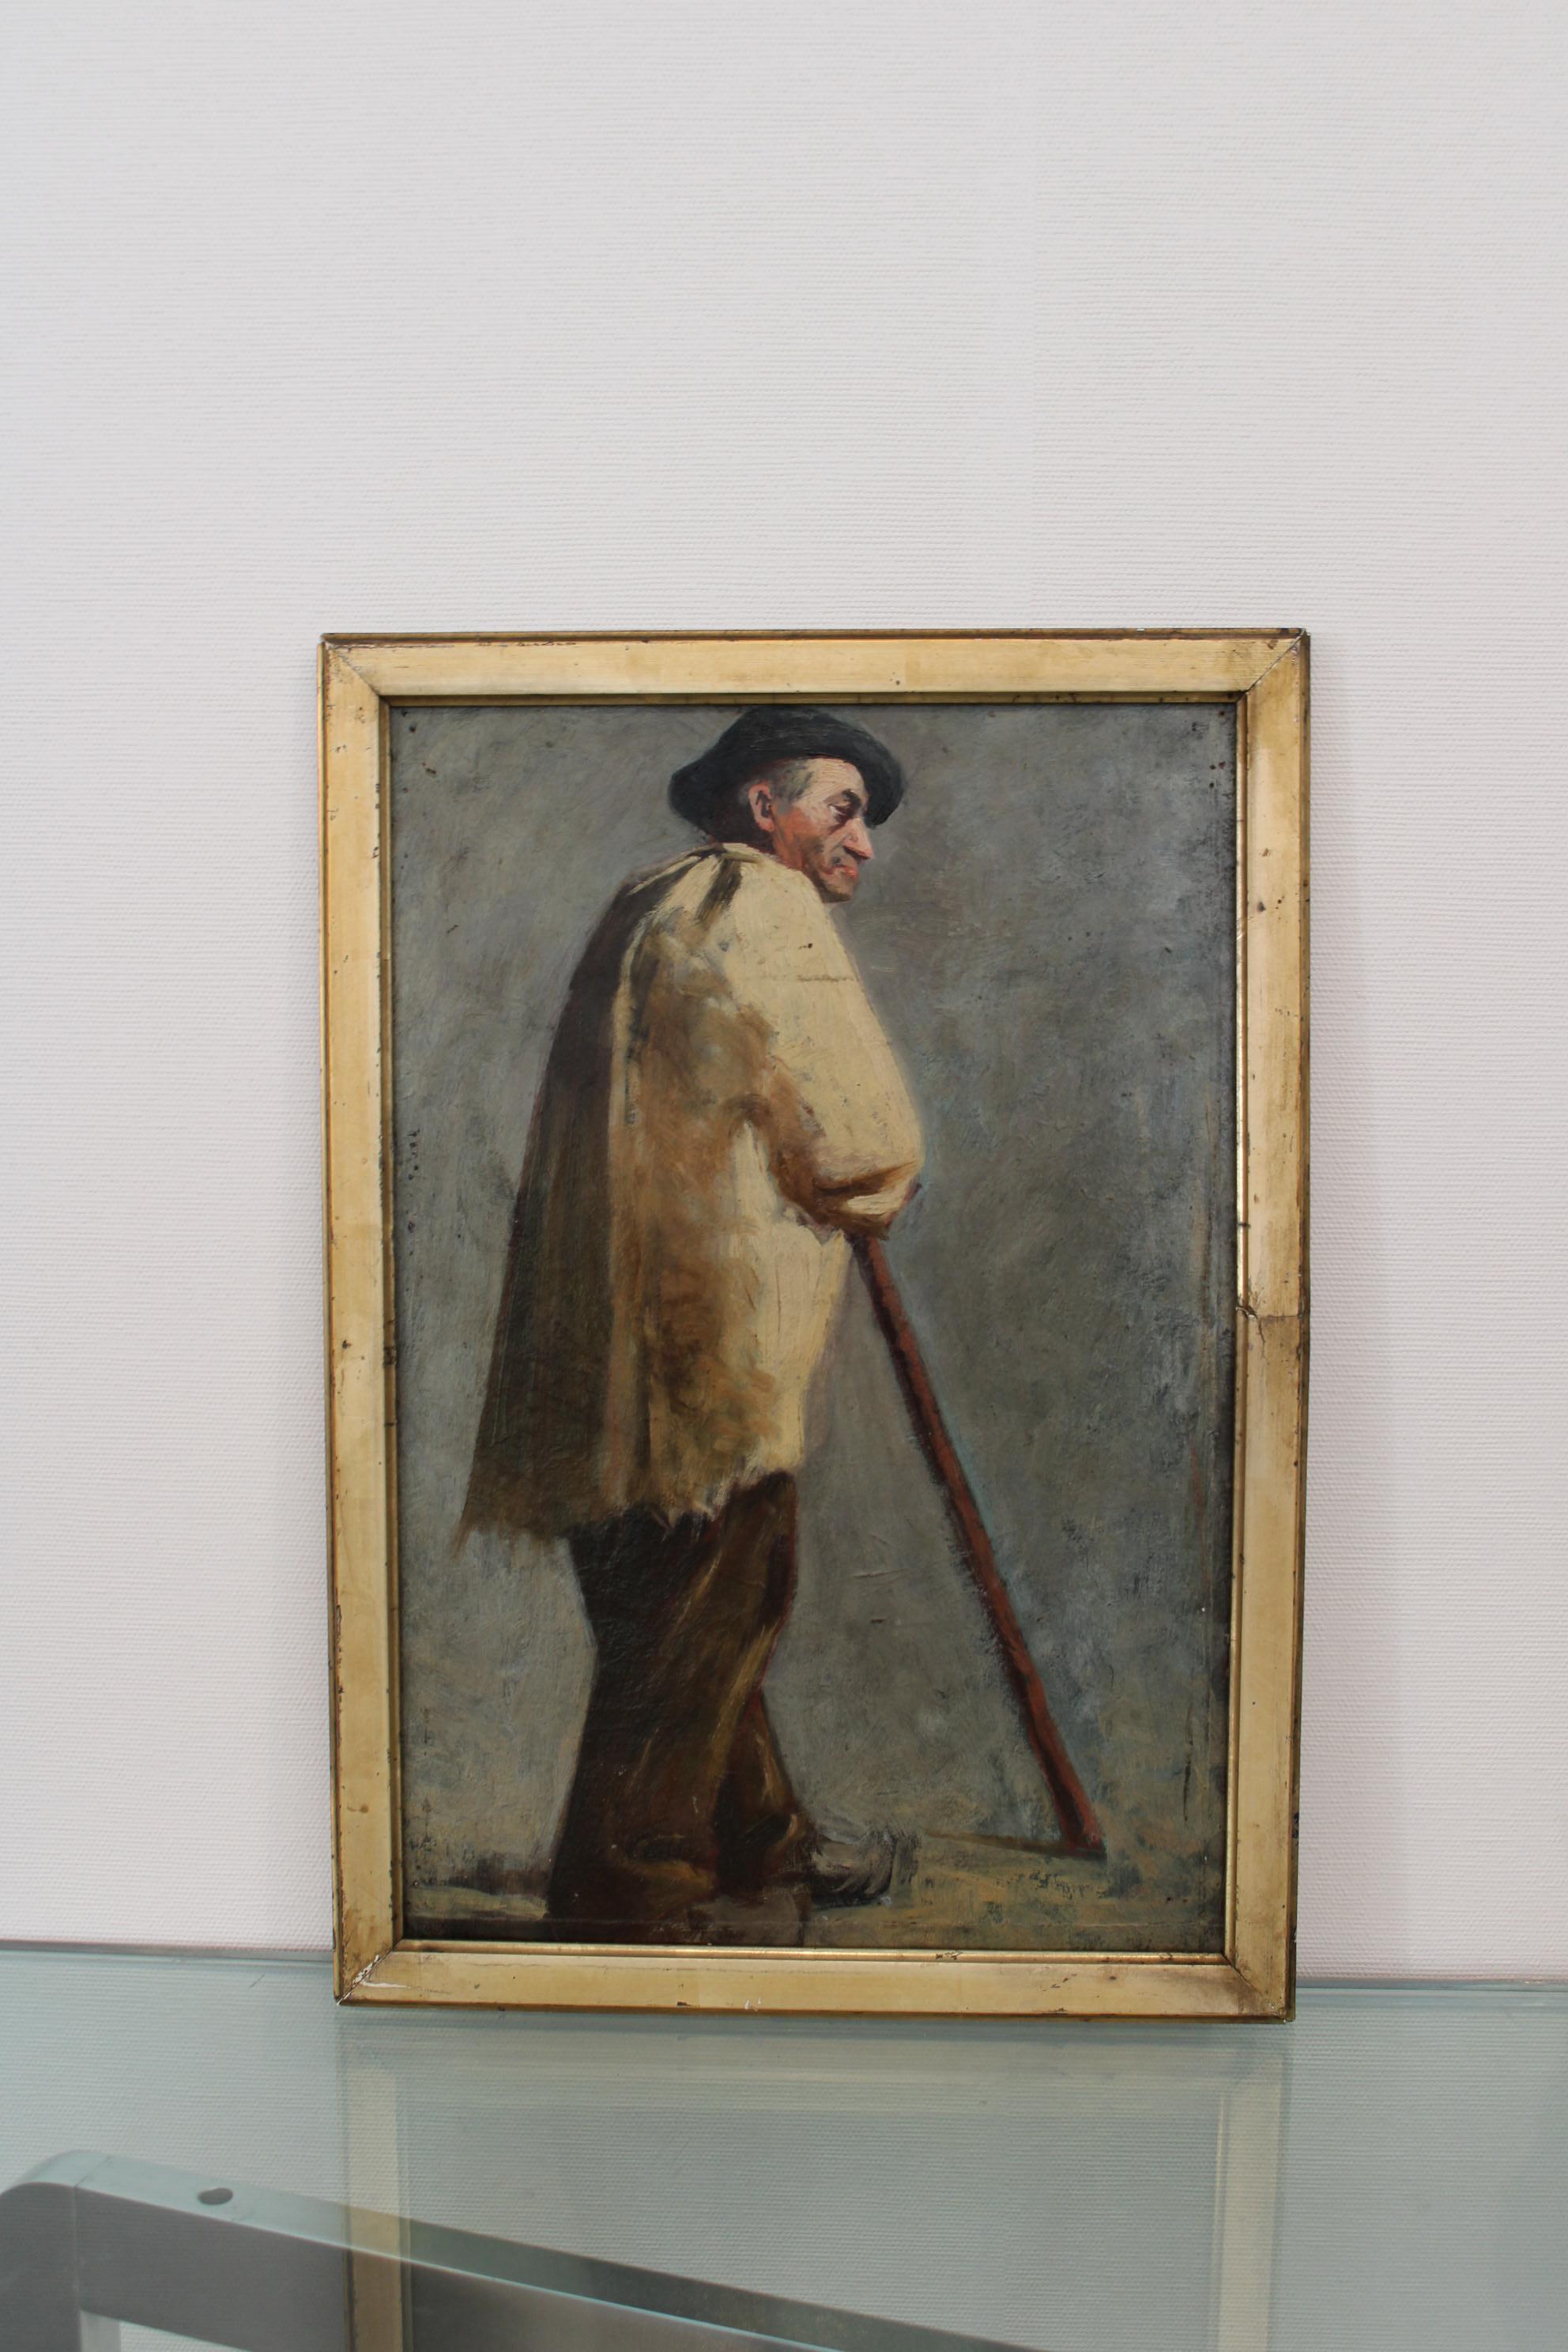 Portrait of a Provençal man by August Suc
Oil on cardboard
France, 19th-20th century

Holes in the painting (see photos details).